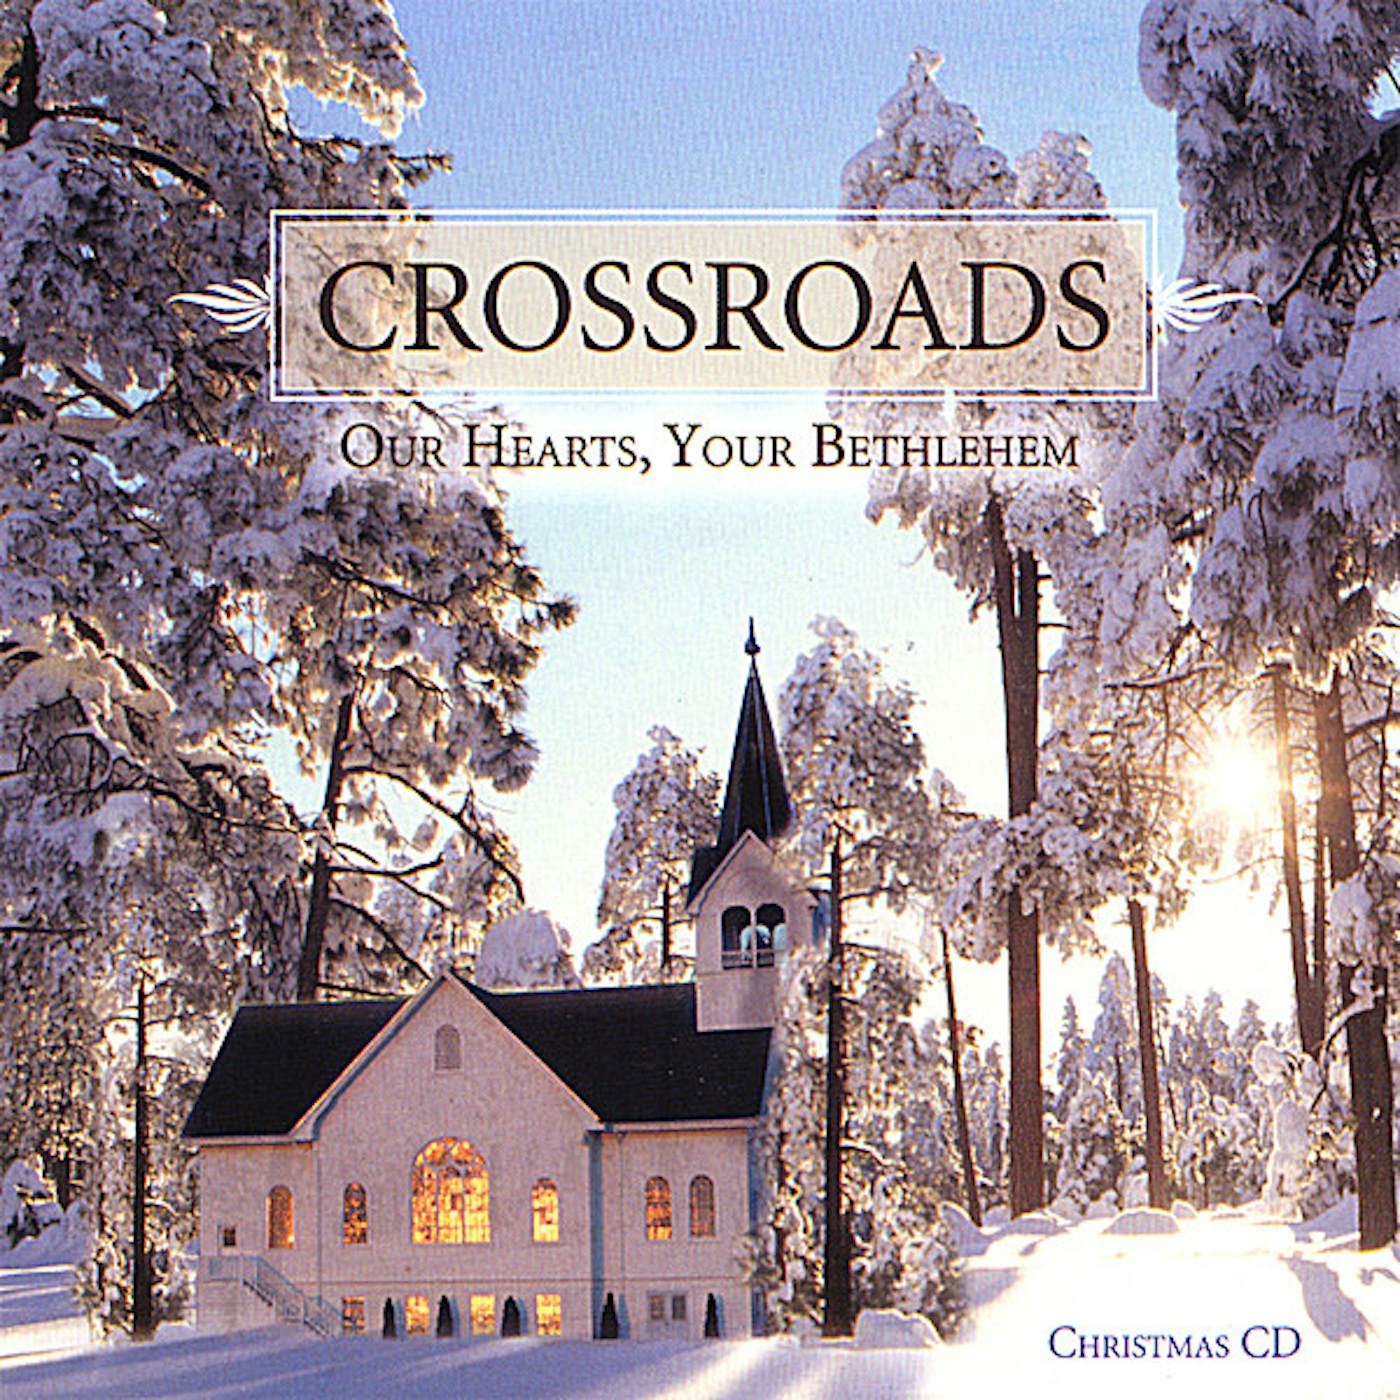 Crossroads OUR HEARTS YOUR BETHLEHEM CD